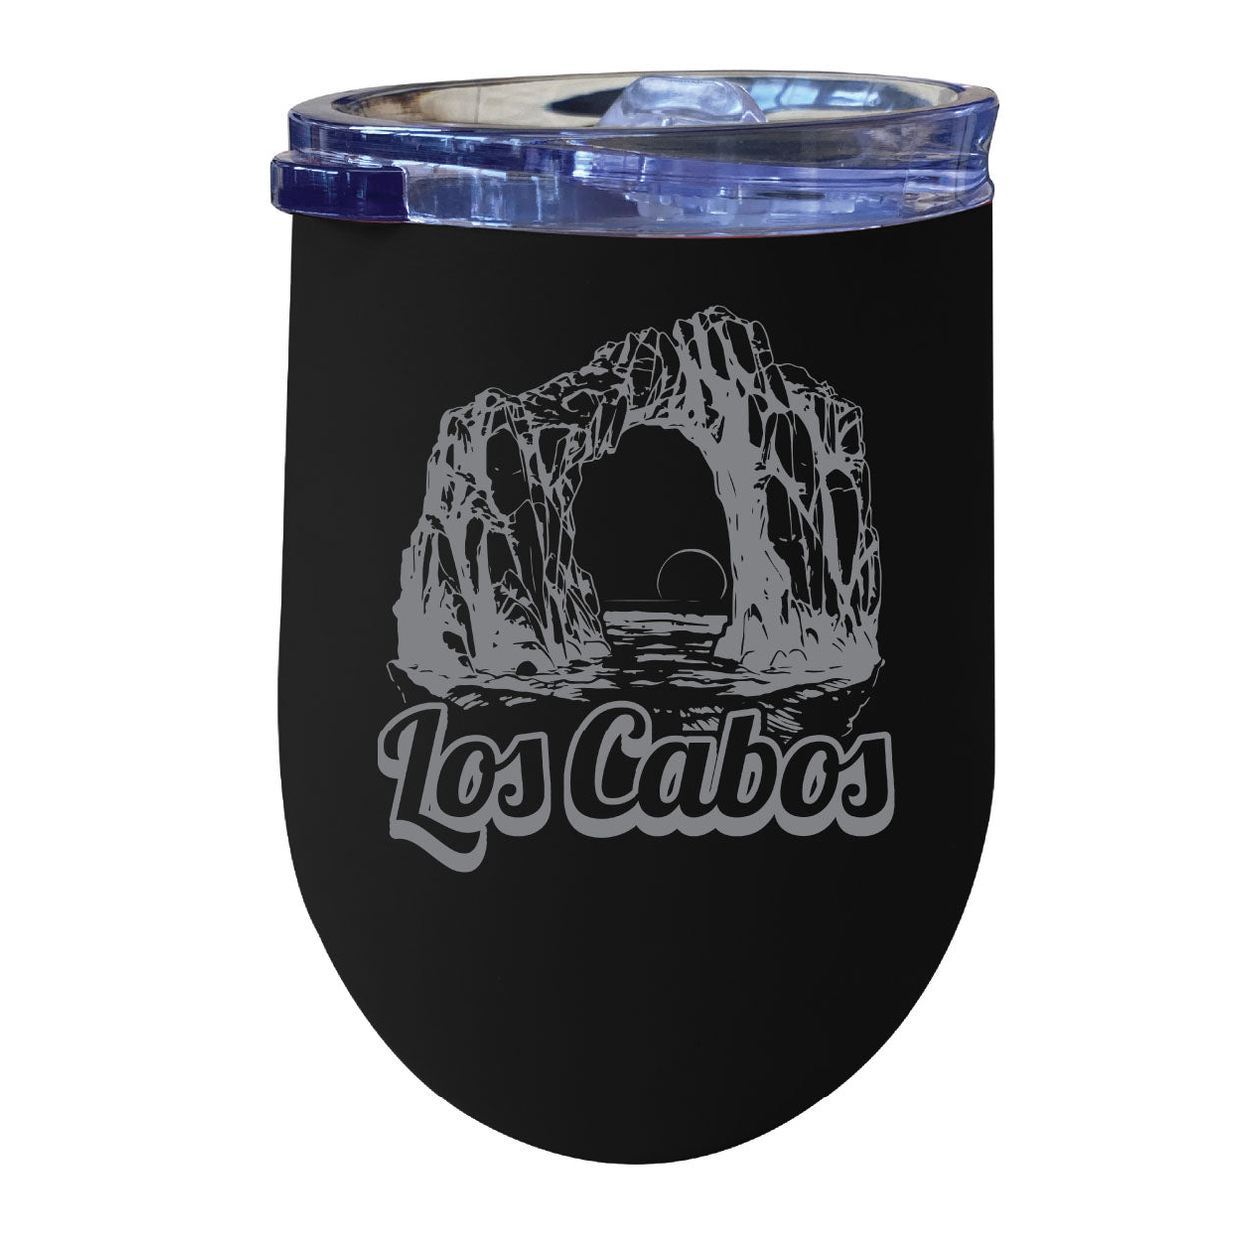 Los Cabos Mexico Souvenir 12 Oz Engraved Insulated Wine Stainless Steel Tumbler - Black,,2-Pack